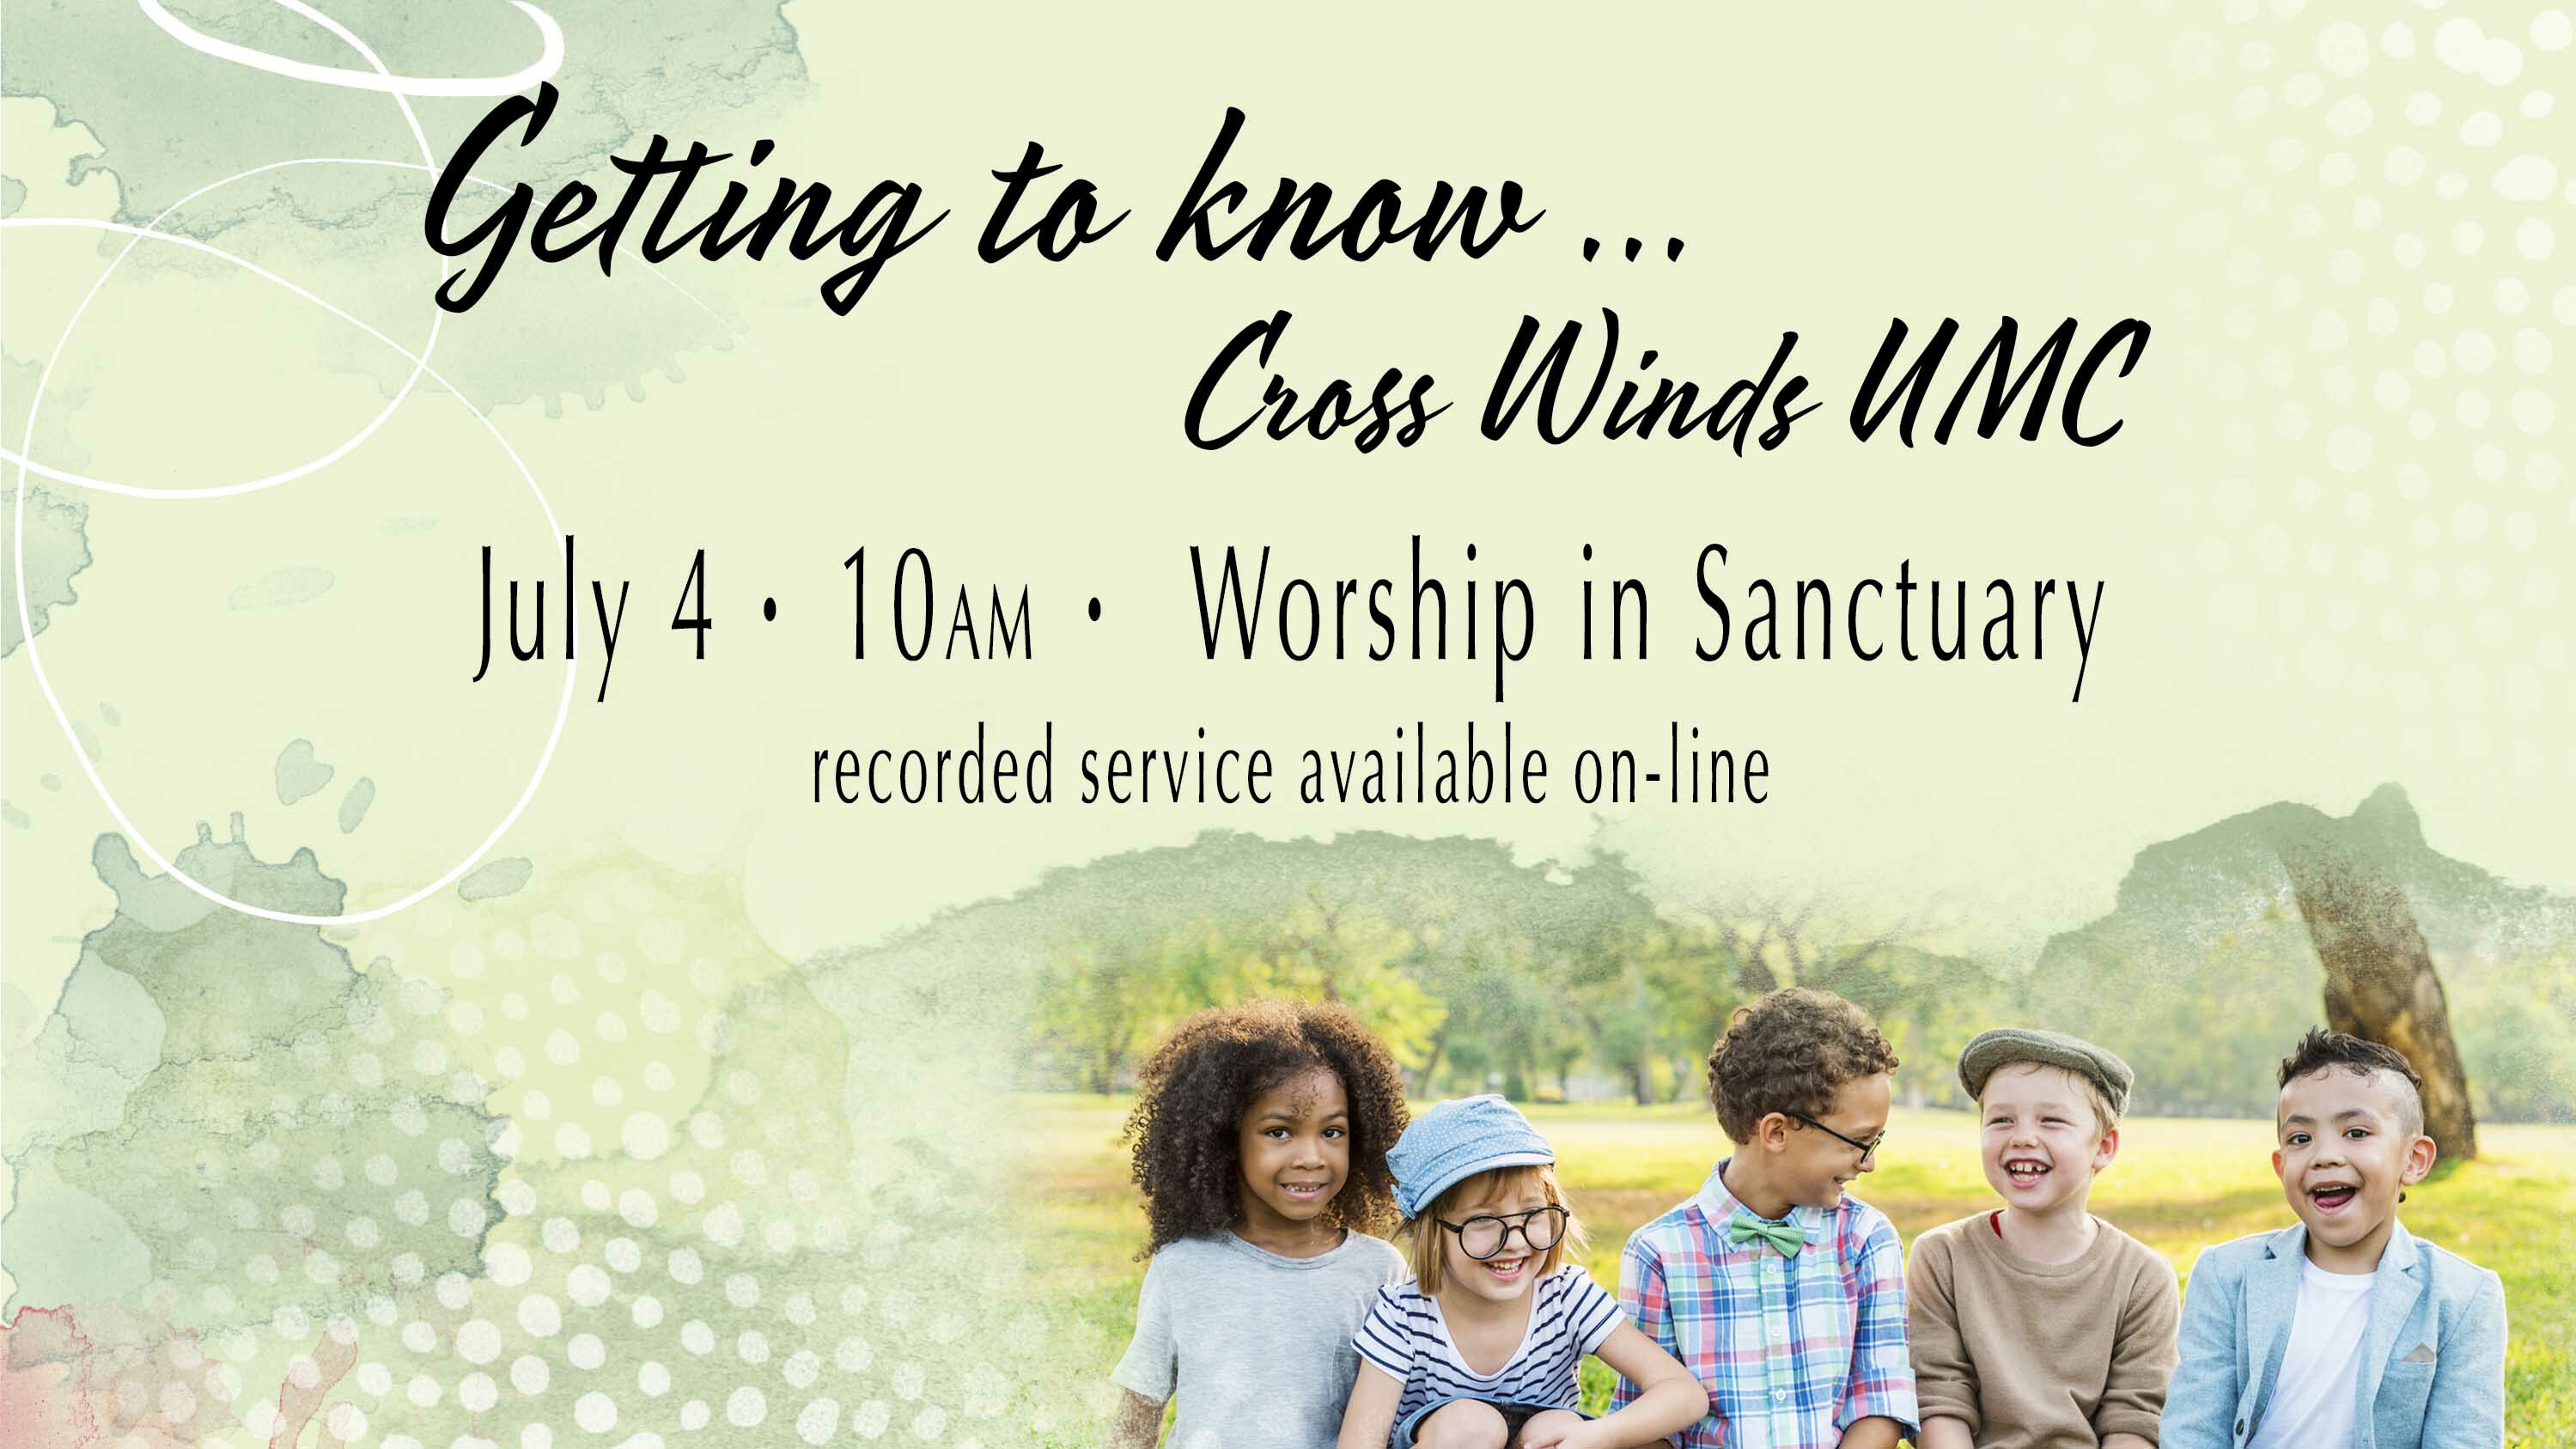 Getting to know ... Cross Winds UMC